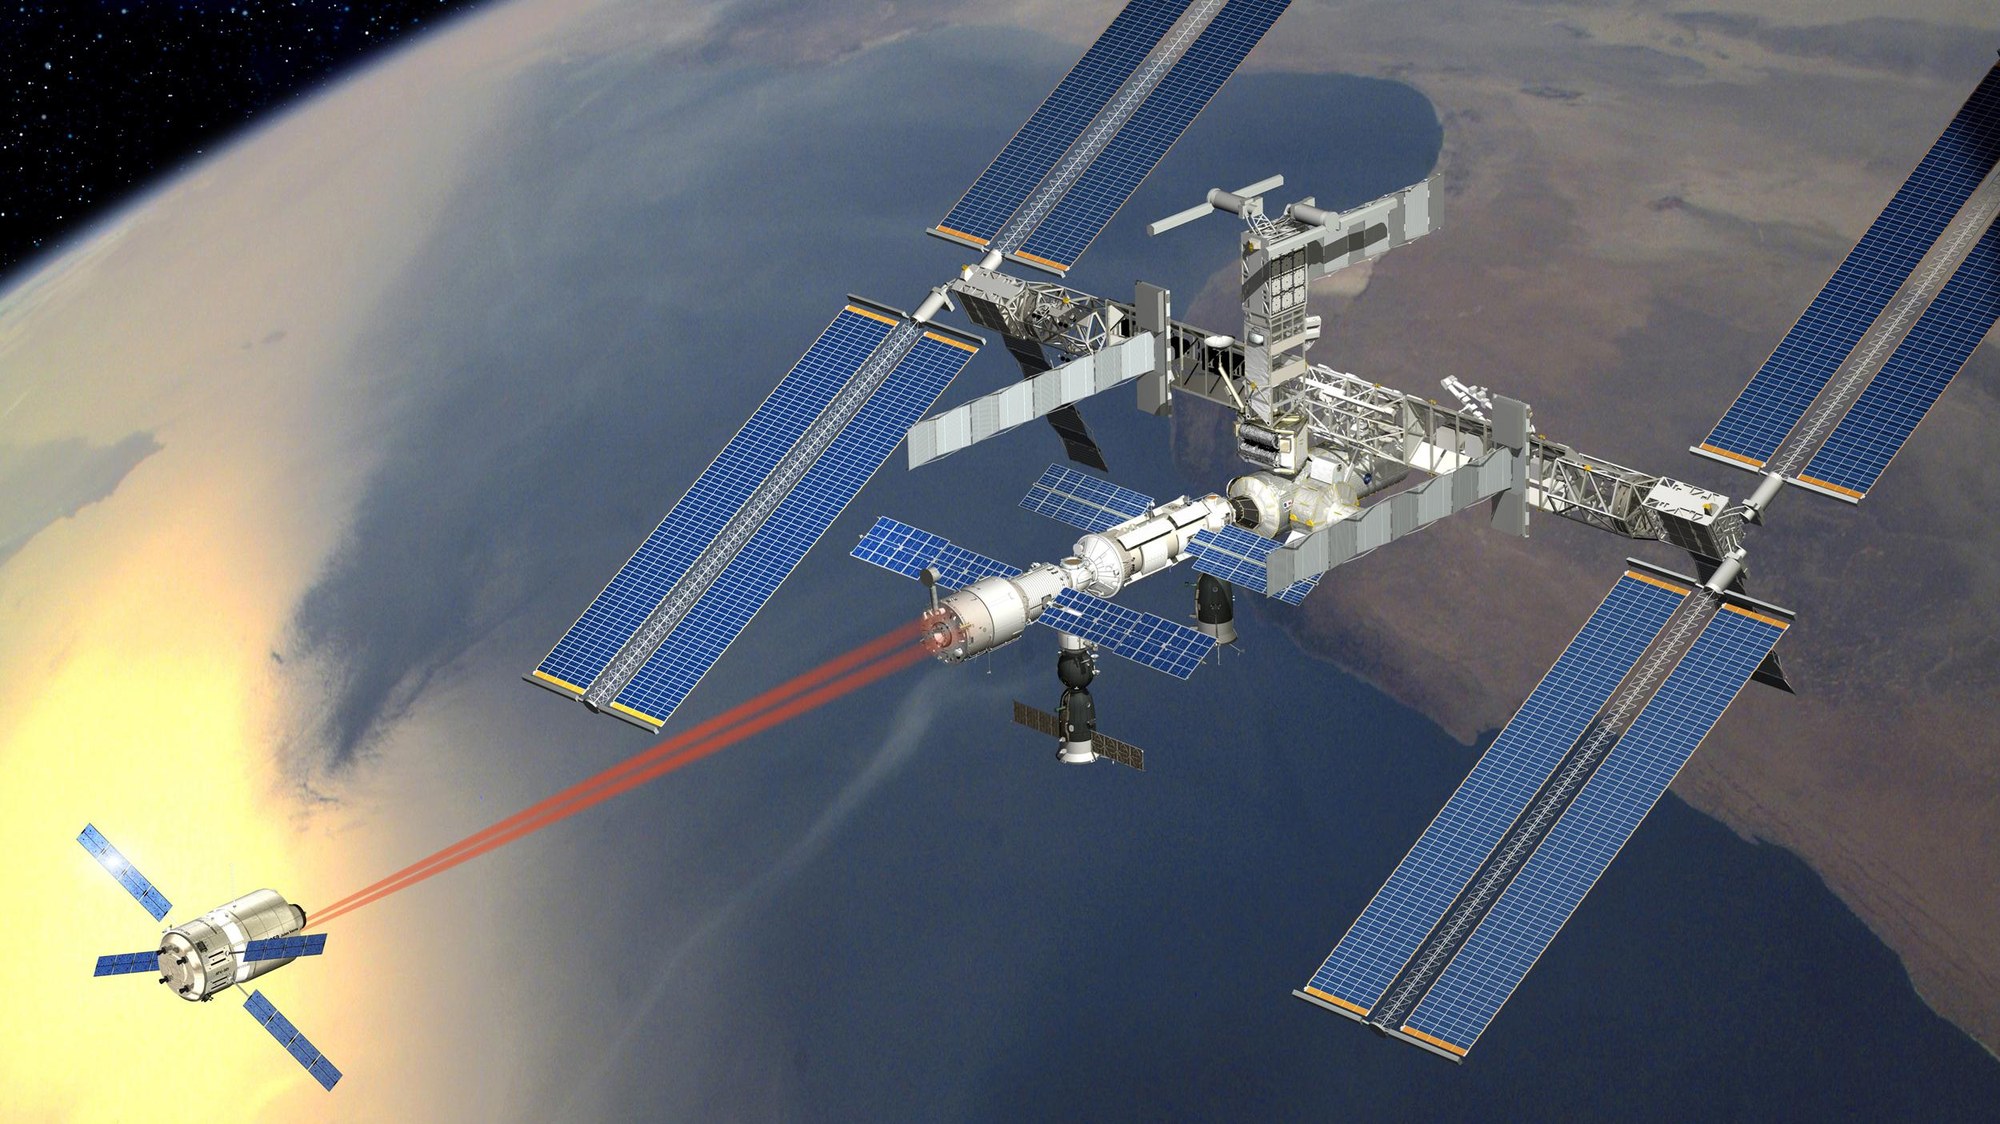 Artist's impression showing an ATV docking with the ISS.